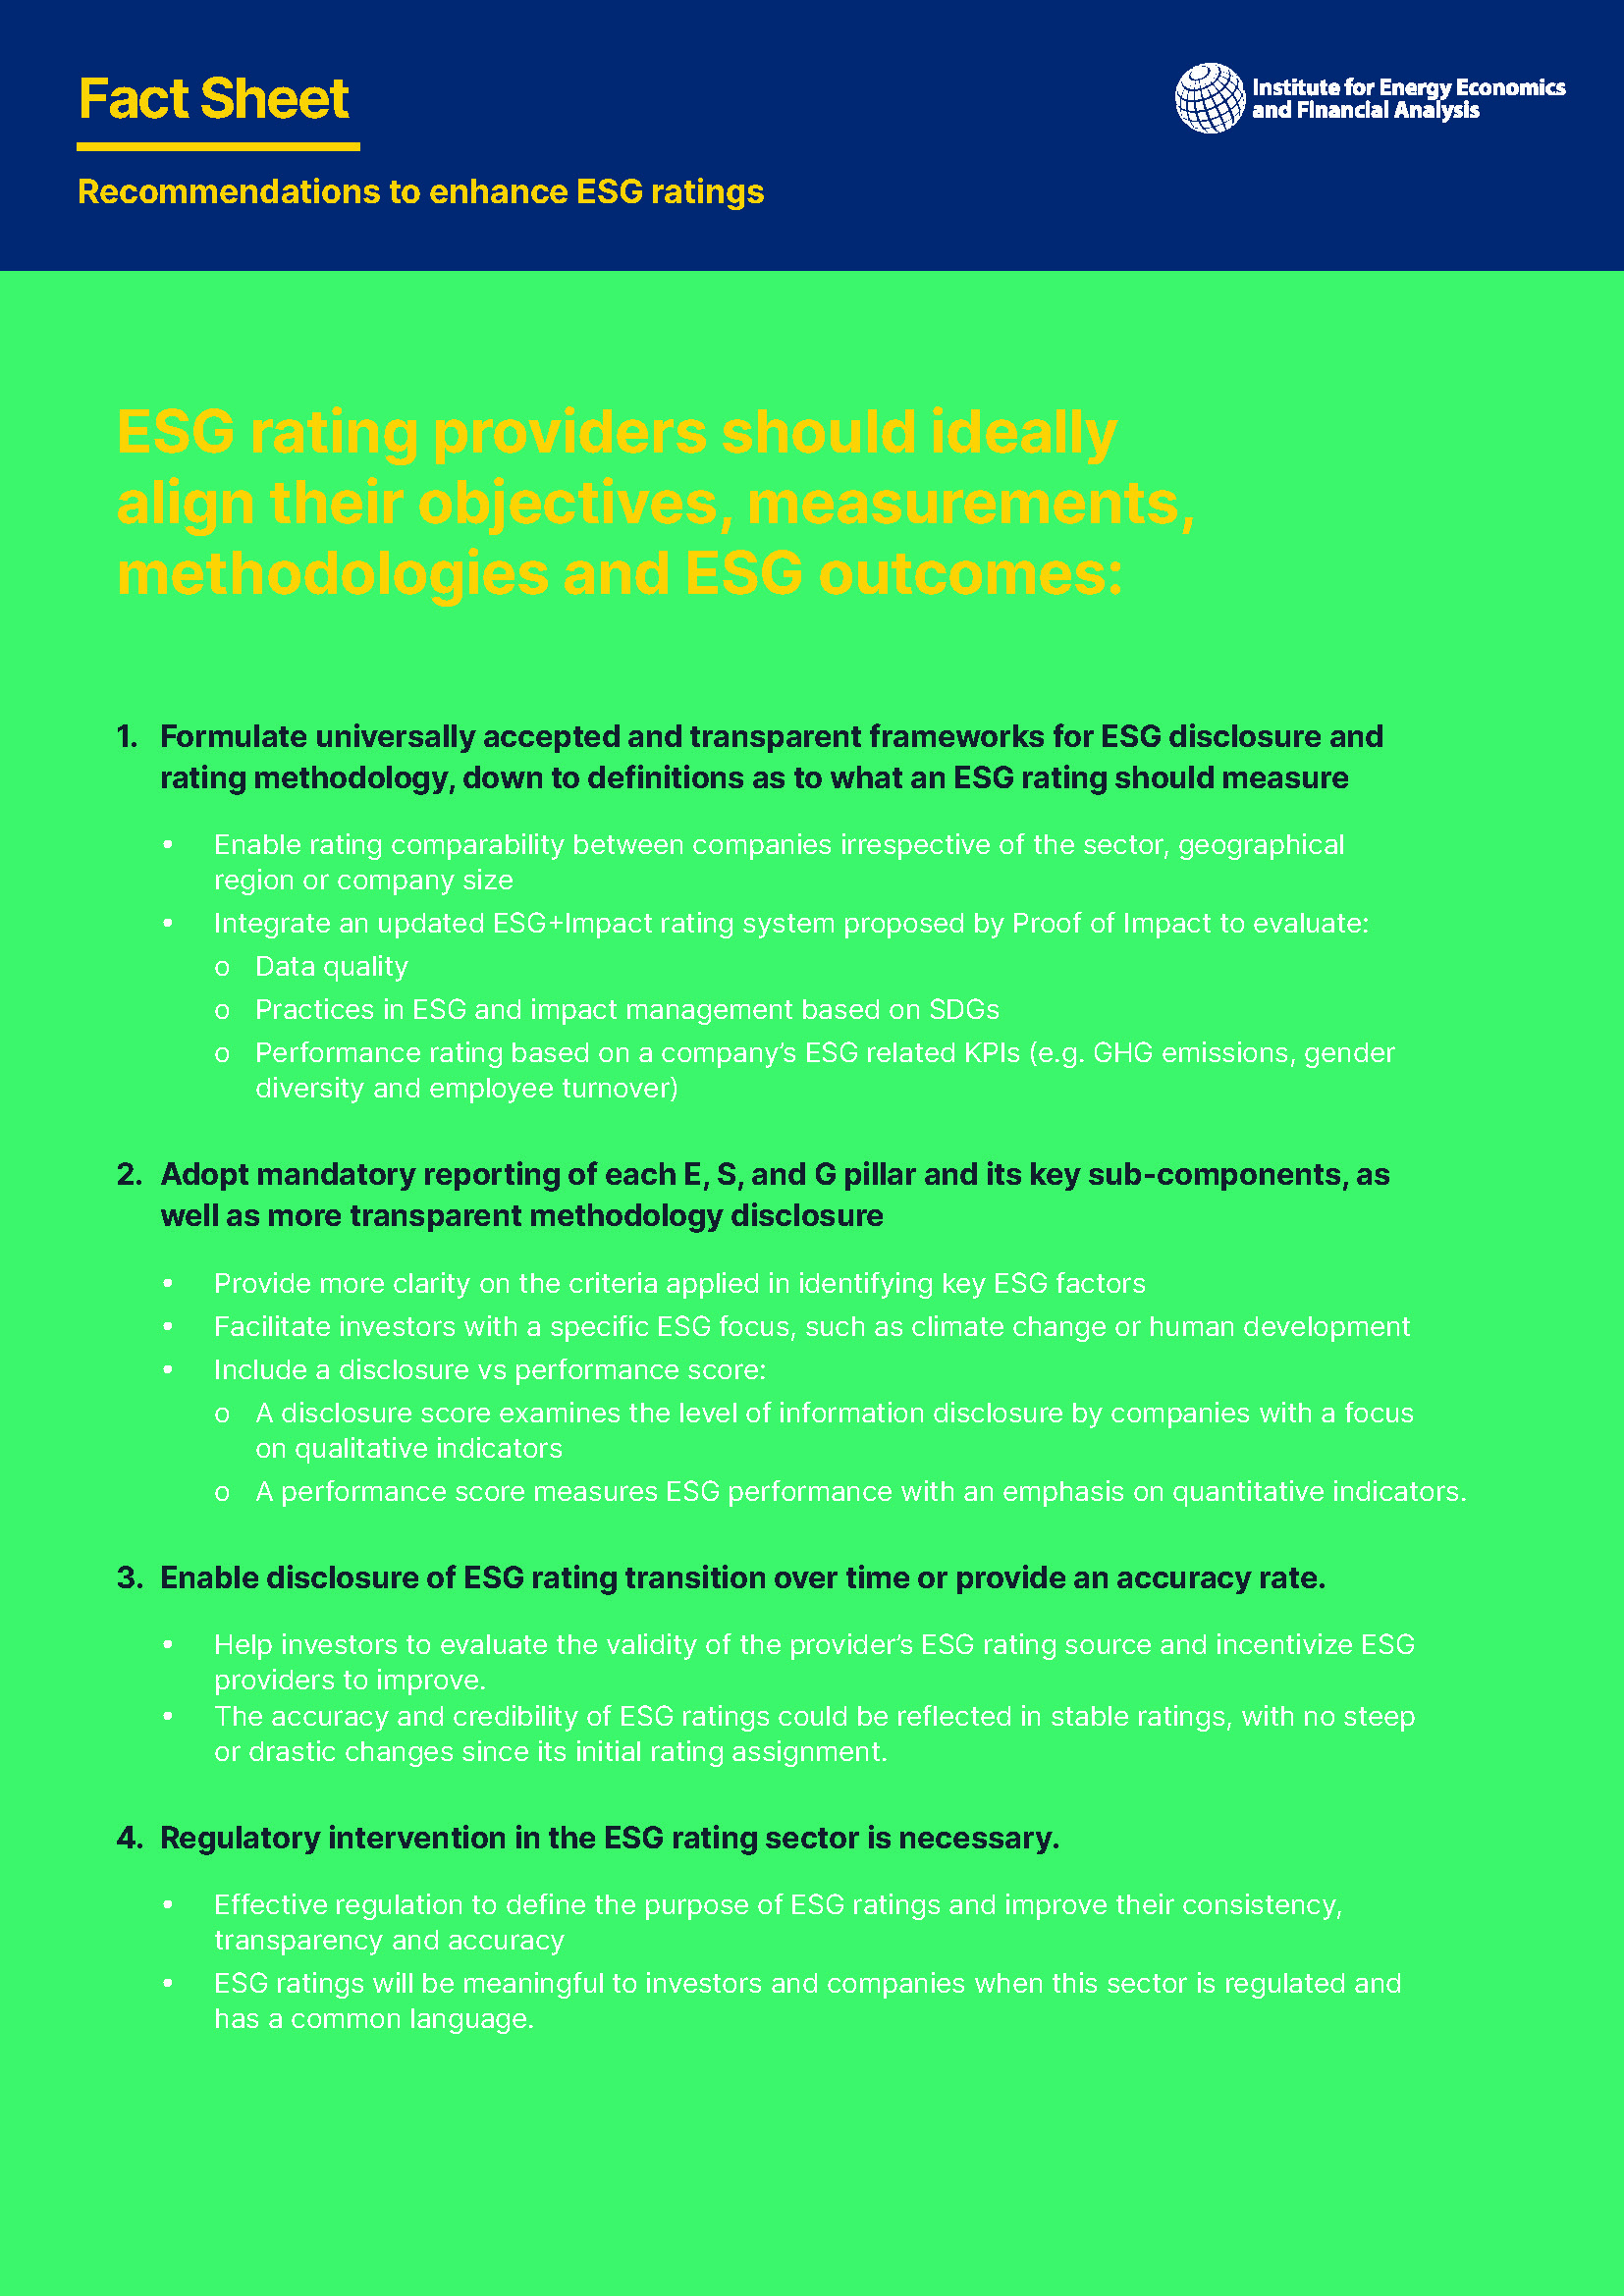 Recommendations to enhance ESG ratings 2